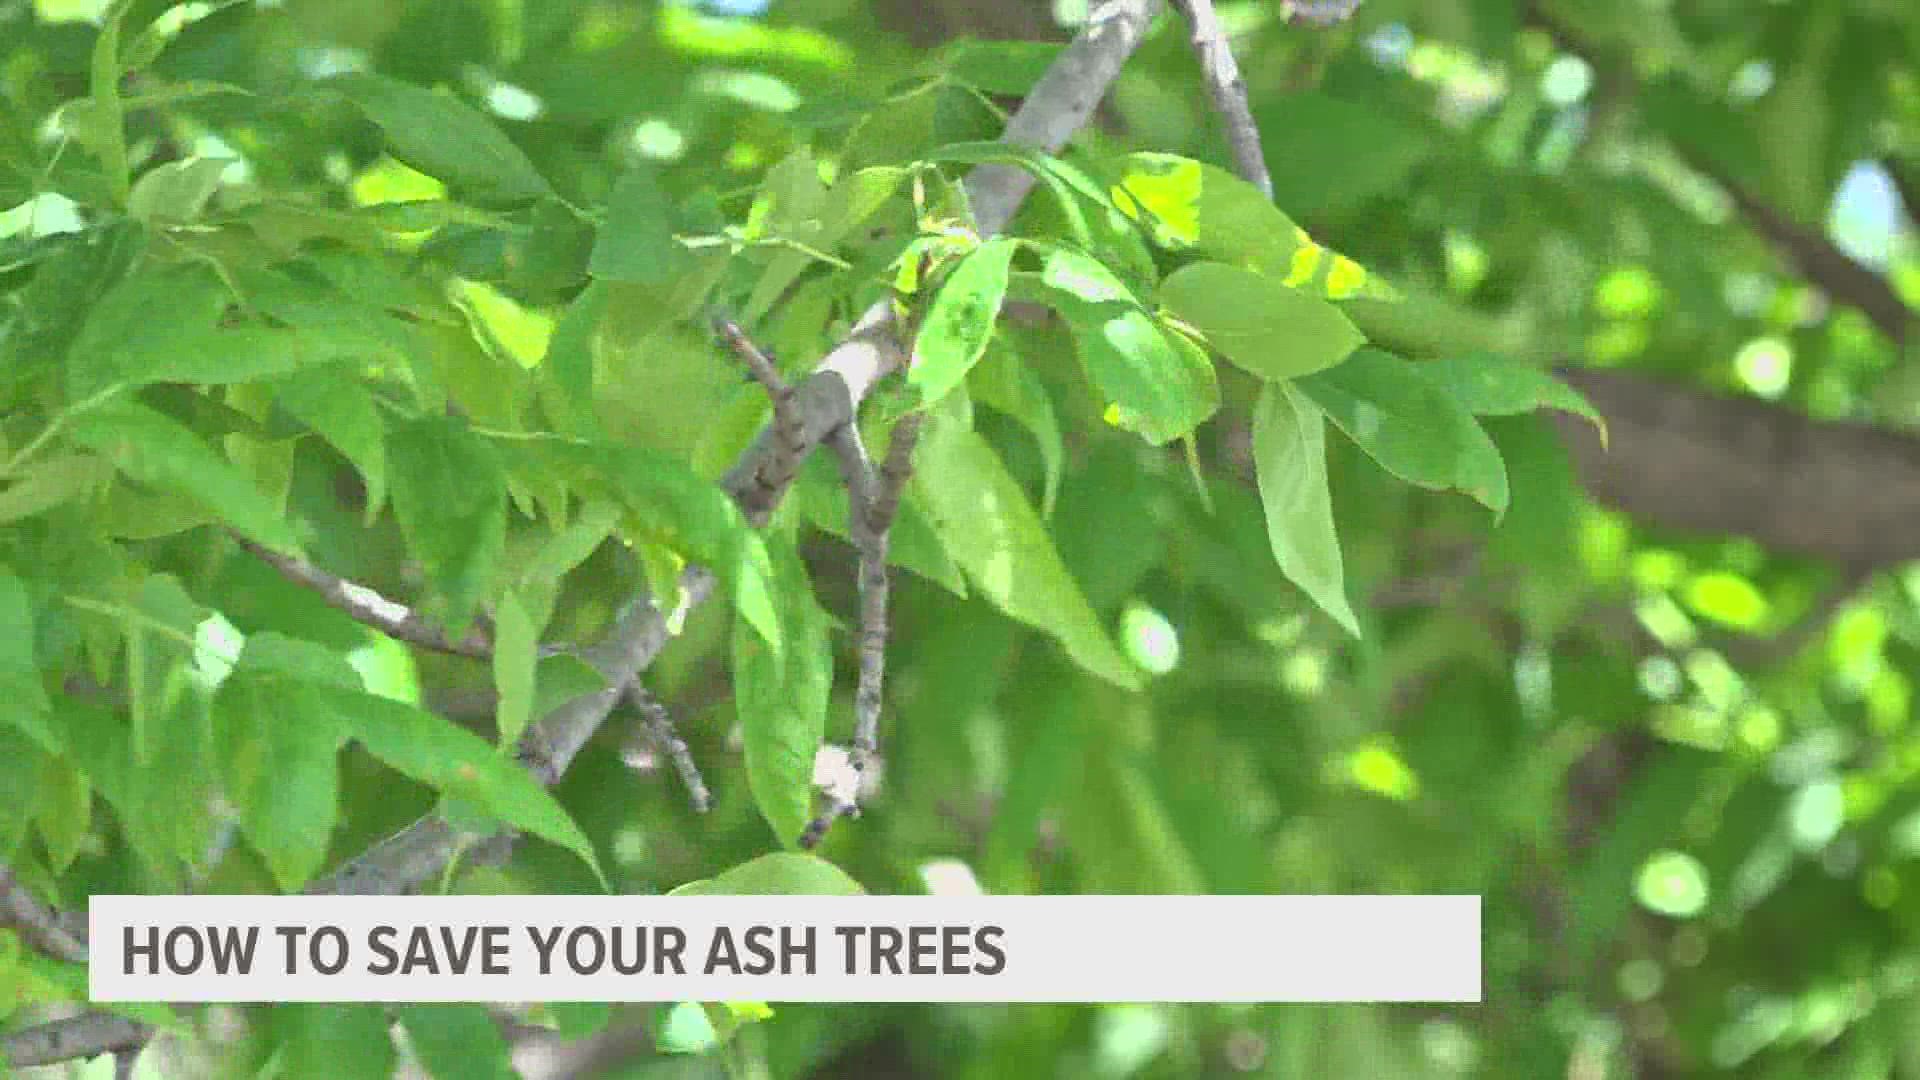 Emerald ash borers were first discovered in Detroit in 2002. Since then, they've spread to all but 8 of Iowa's 99 counties, after first being discovered in 2010.